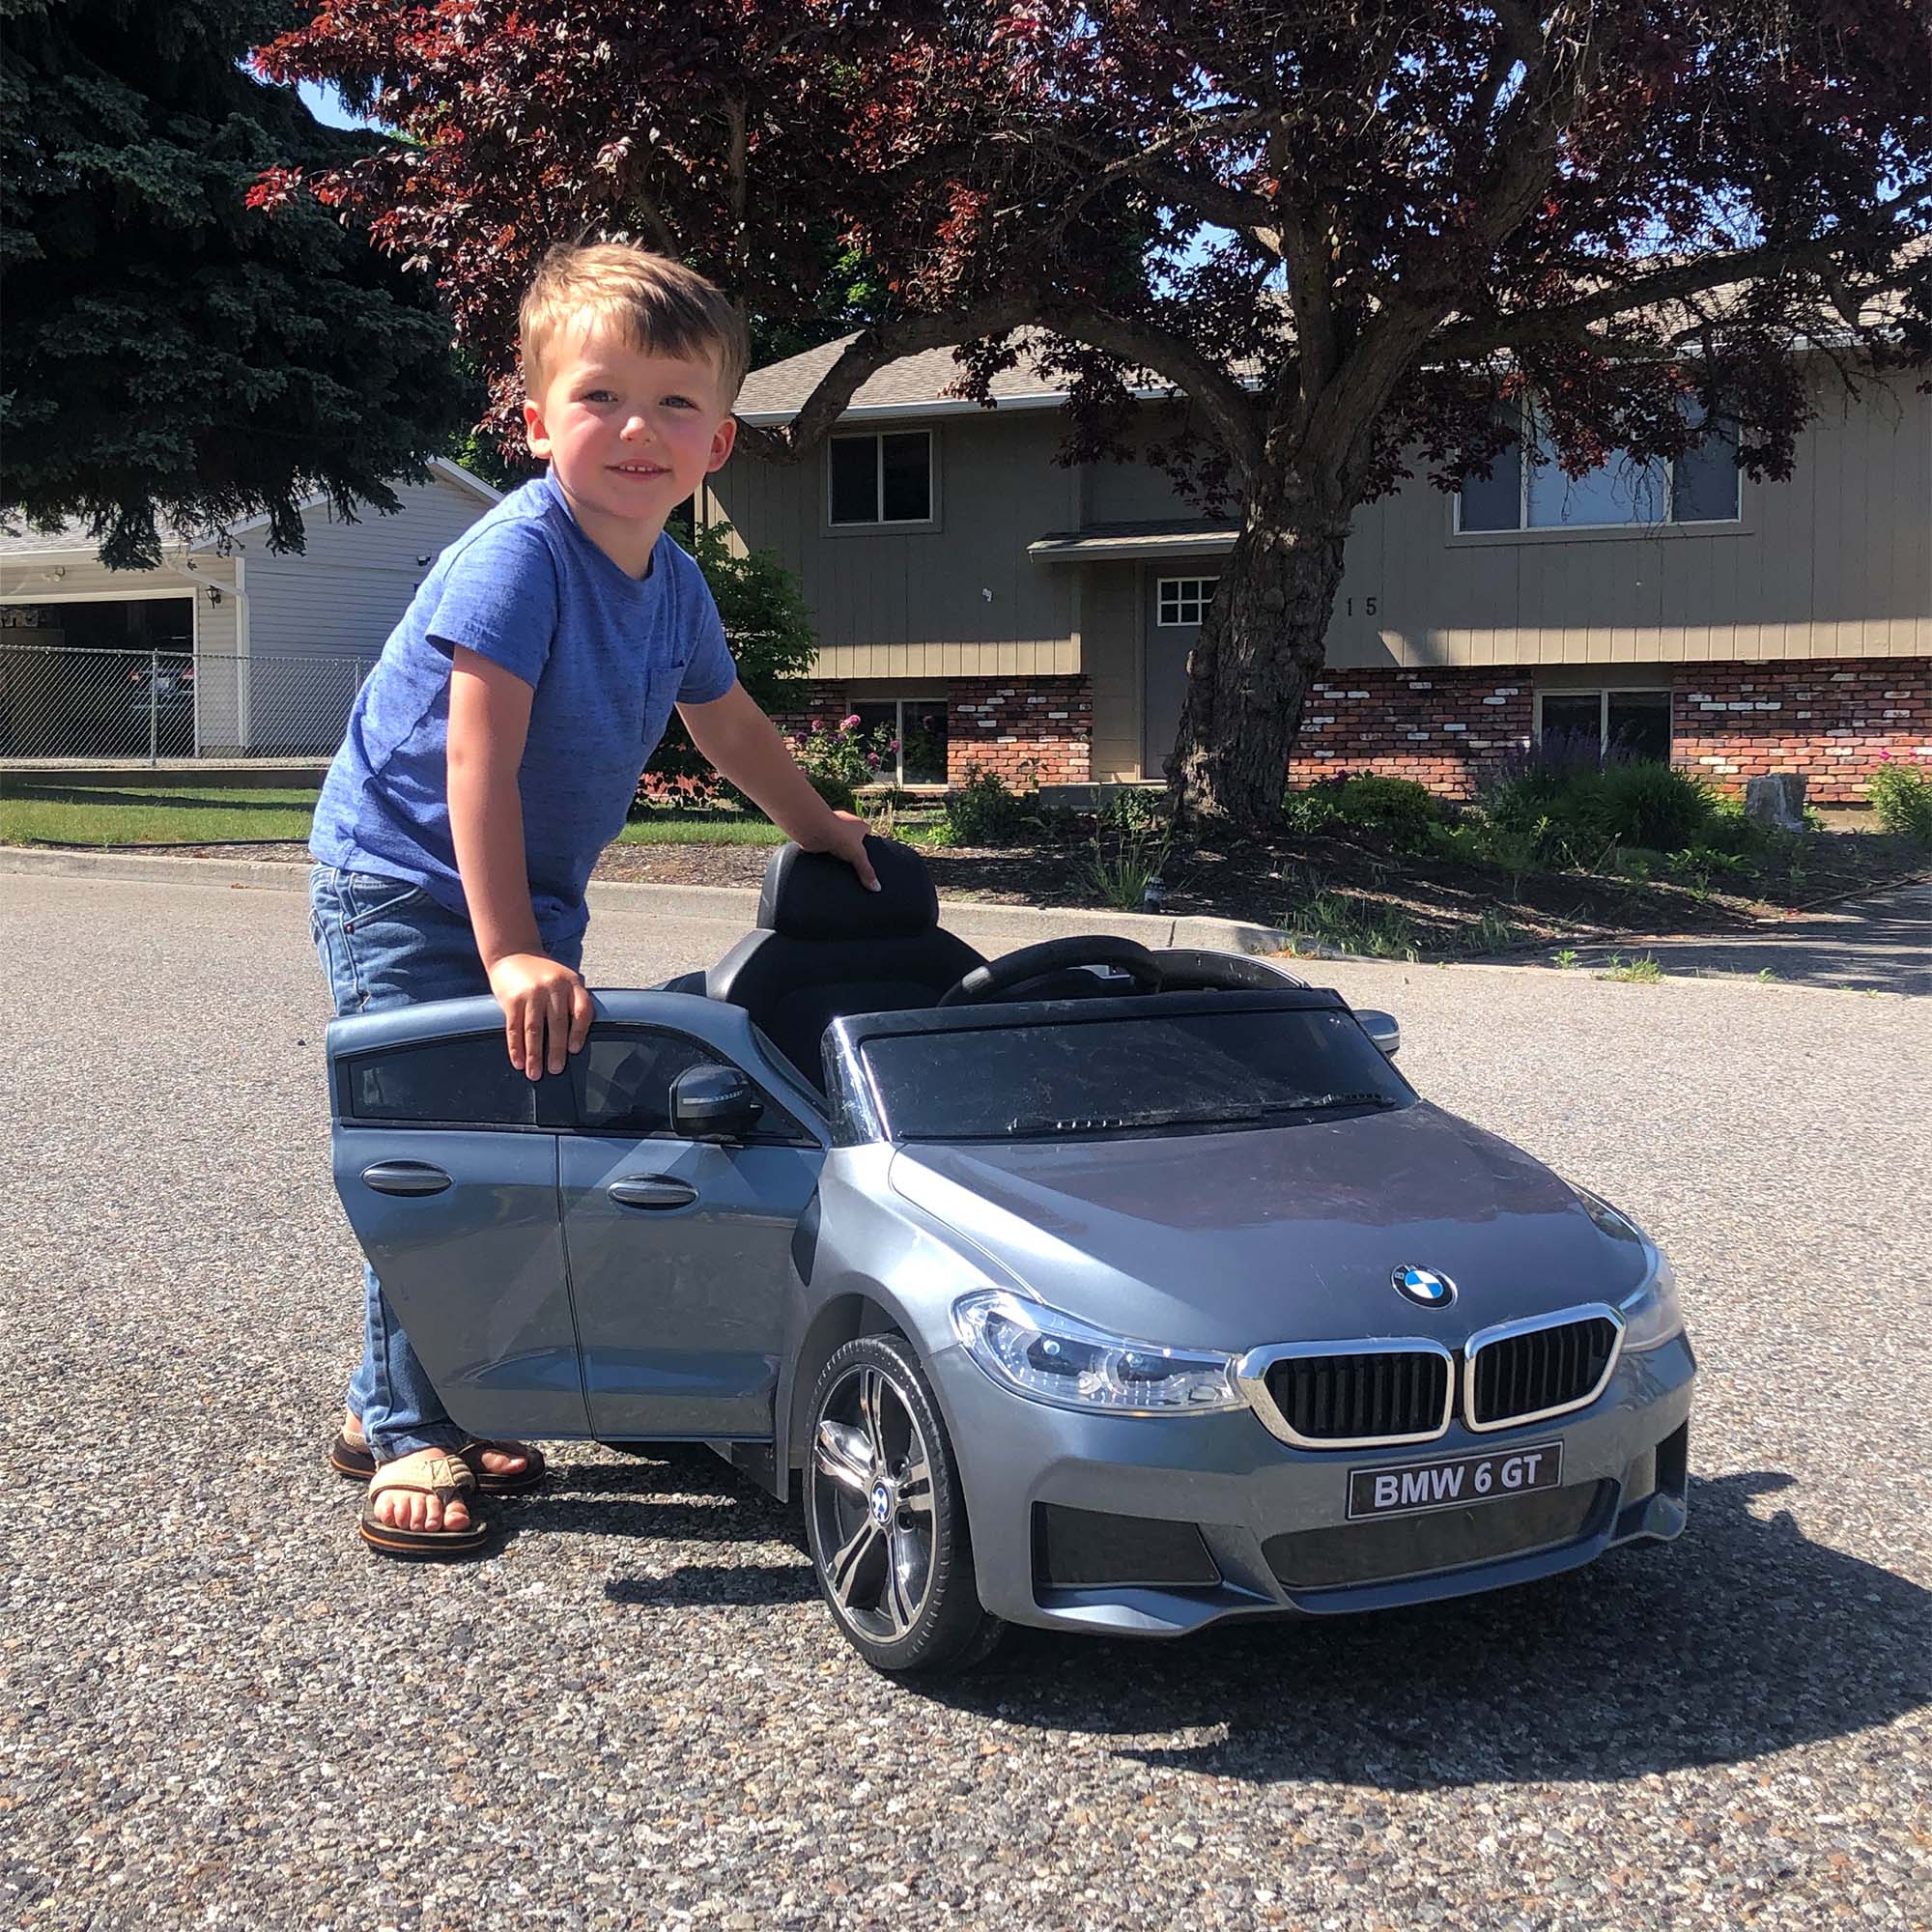 Kidsera BMW GT6 12V Kids Ride On Car, Licensed Electric Car for Kids, Battery Powered 4-Wheel Electric Vehicle with LED Light, Horn, Spring Suspension, 2 Speed, Ride On Toy for Kids Gril & Boys 